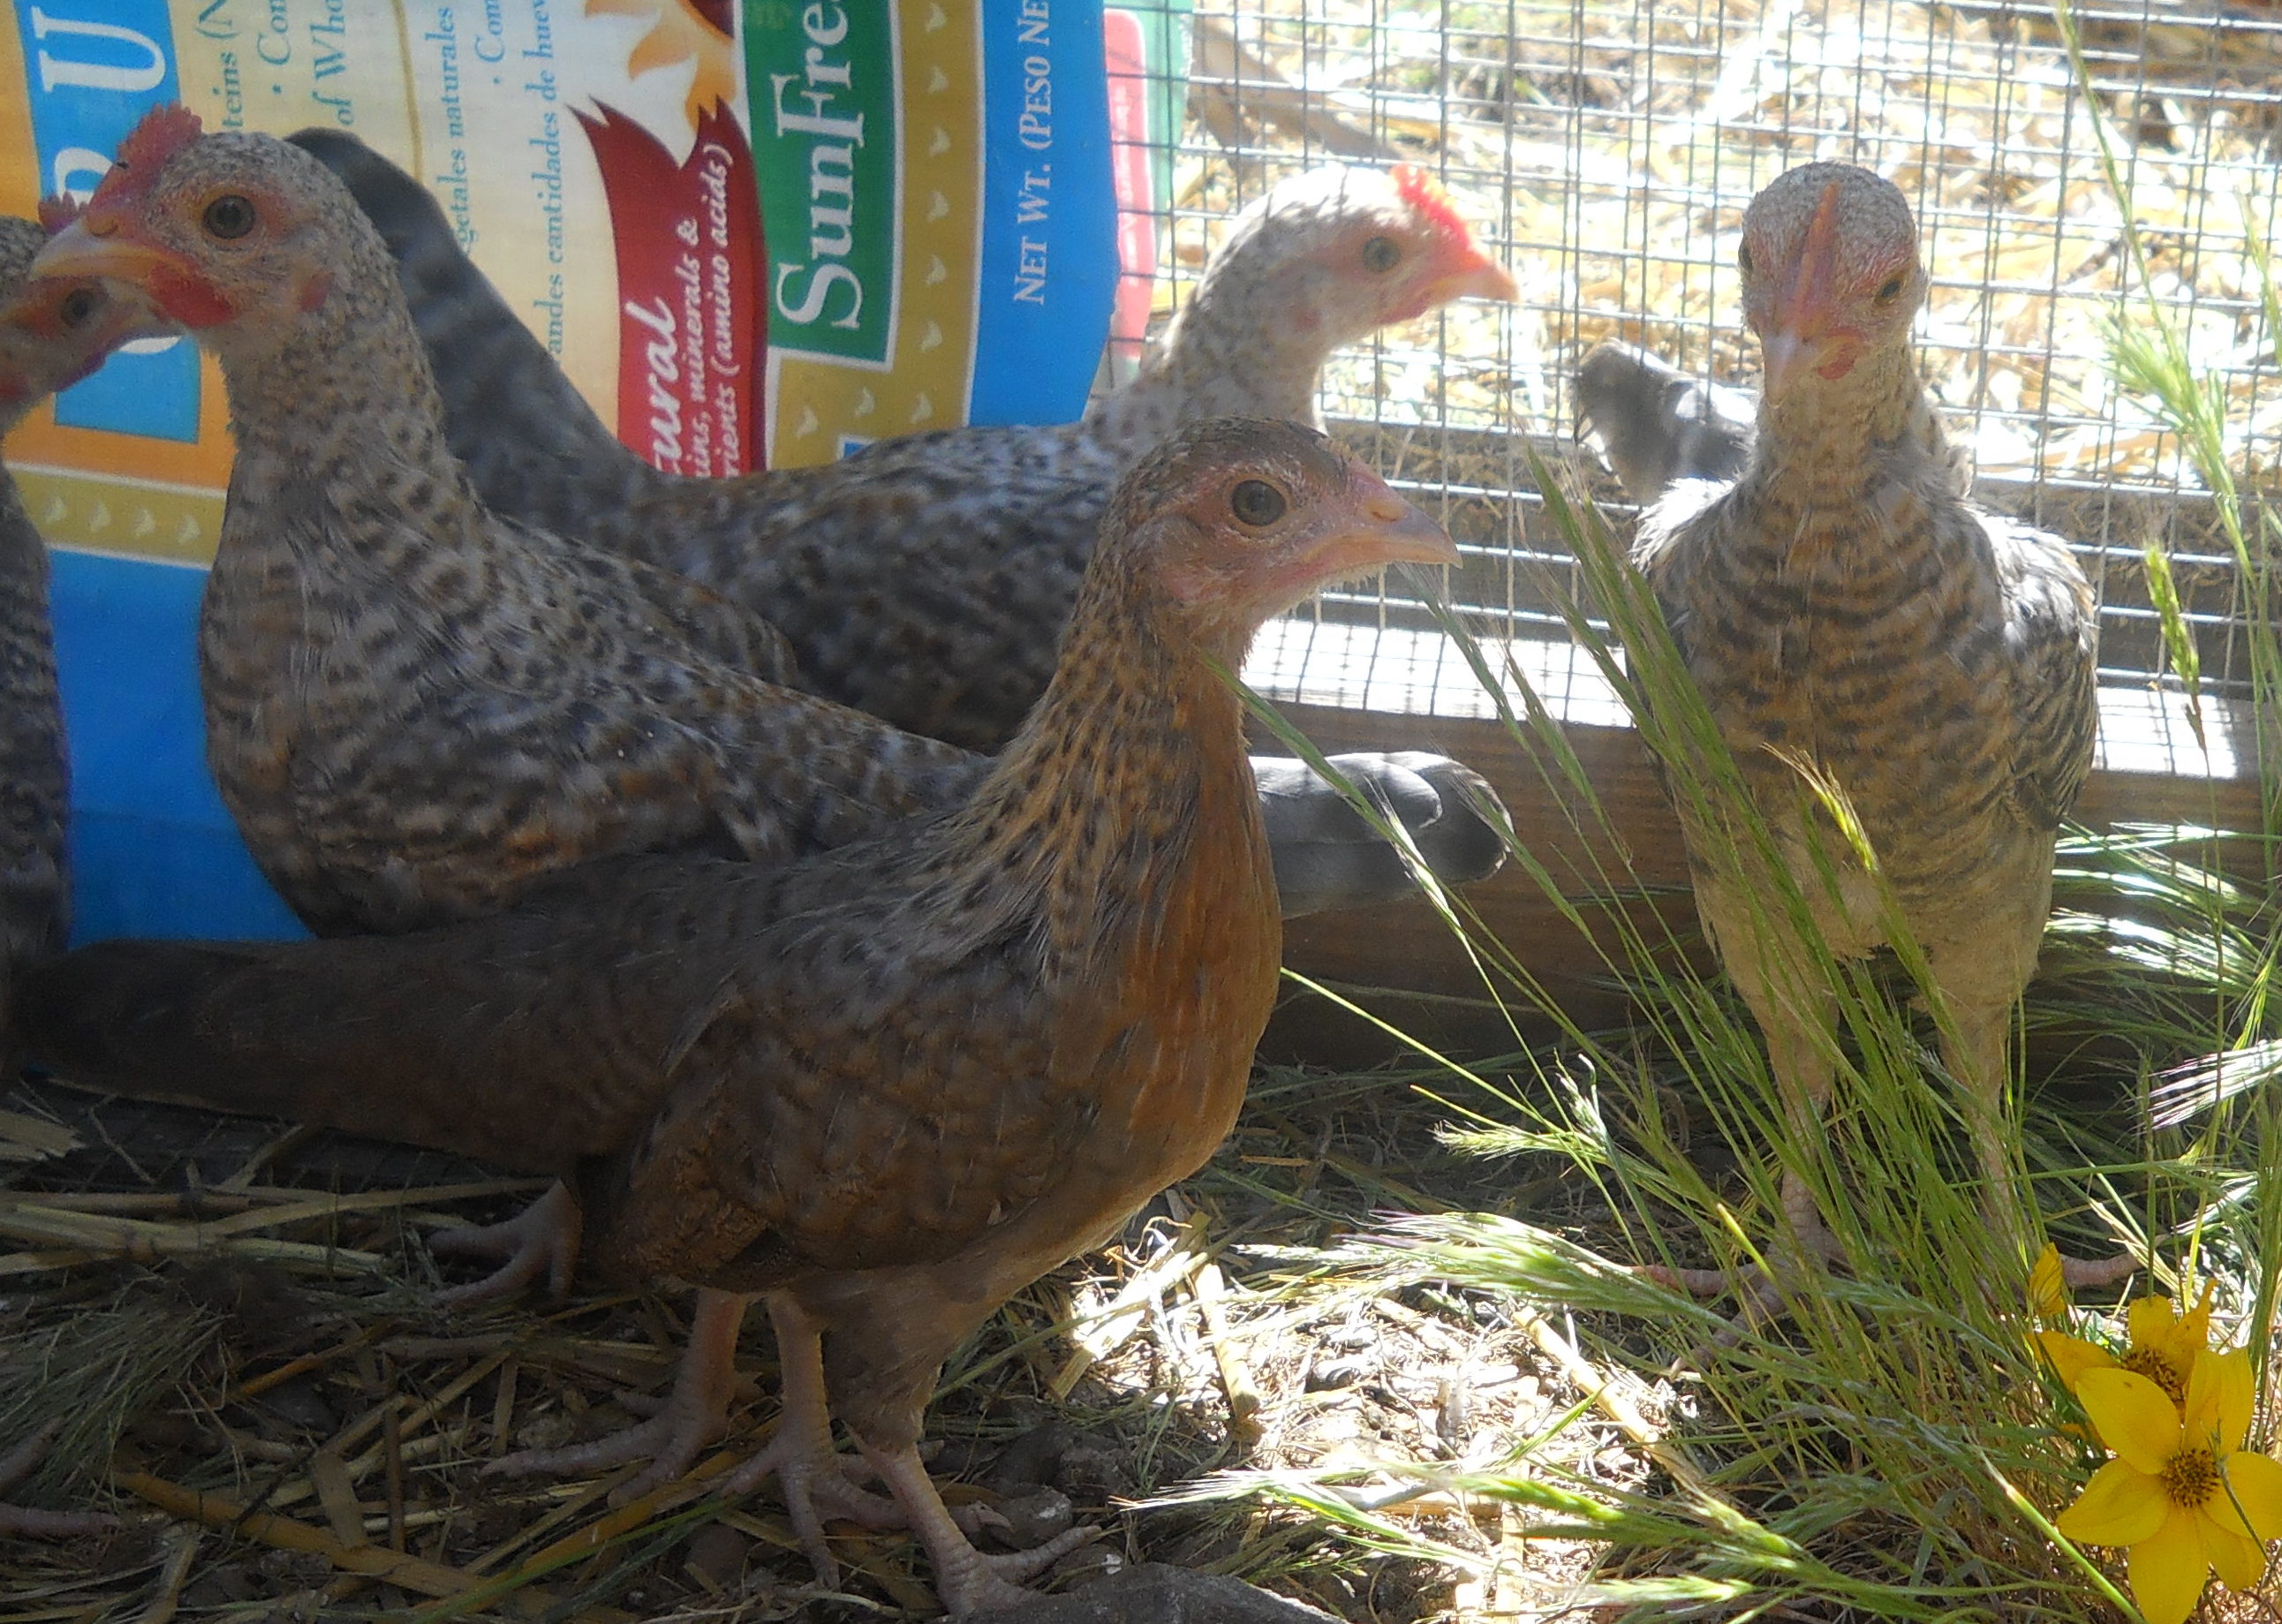 OEGB creles 7 wks foreground is a pullet background are 3 roos